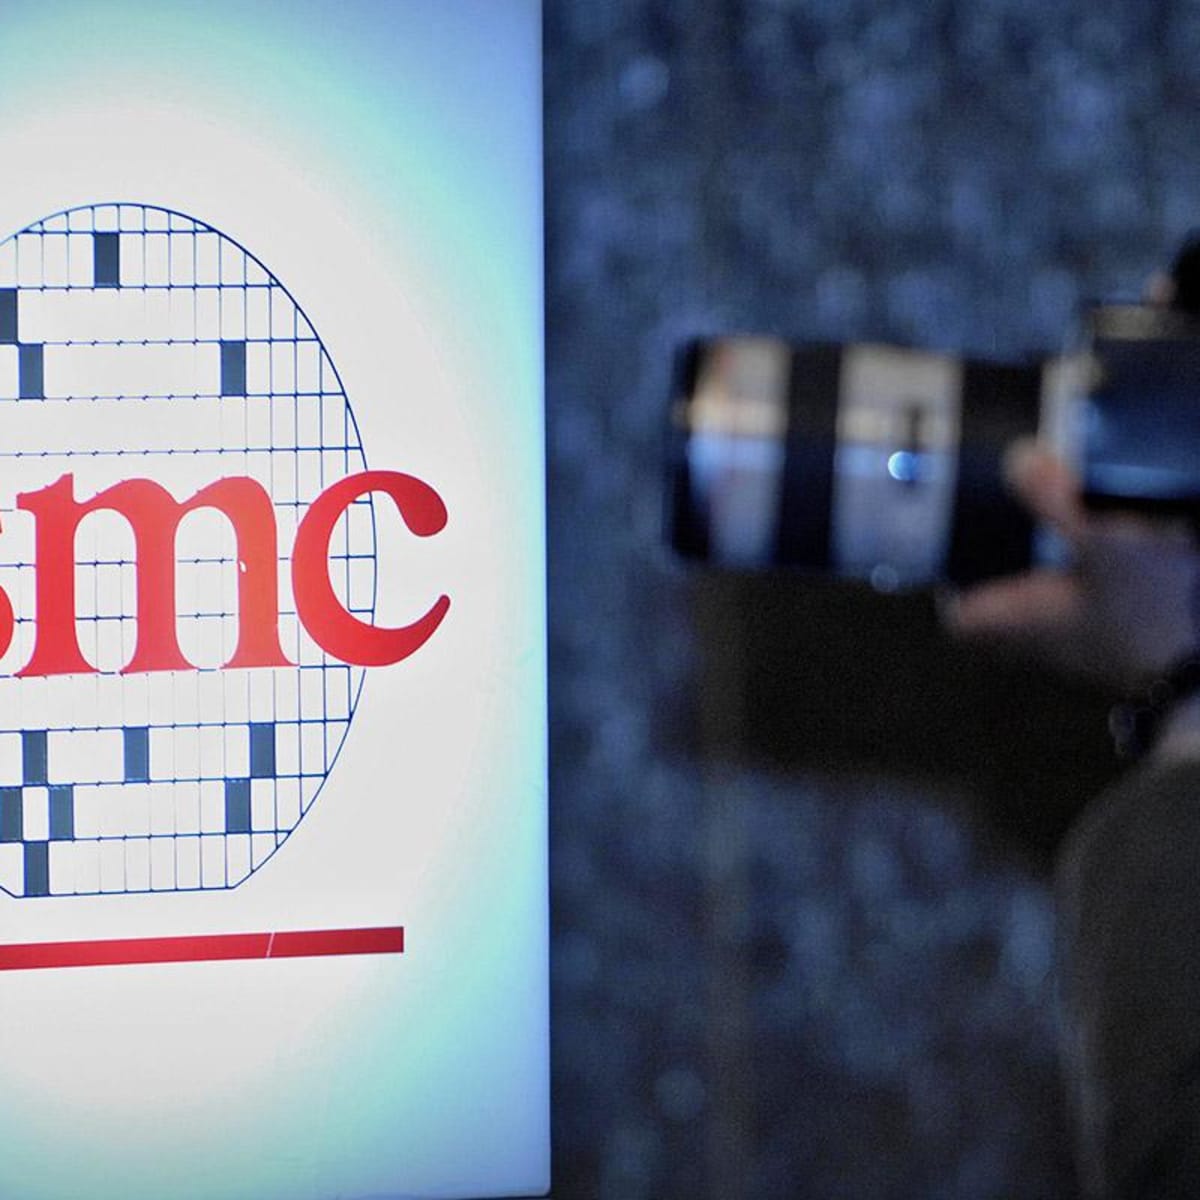 Tsmc S Manufacturing Tech Lead Is Starting To Pay Off In A Bigger